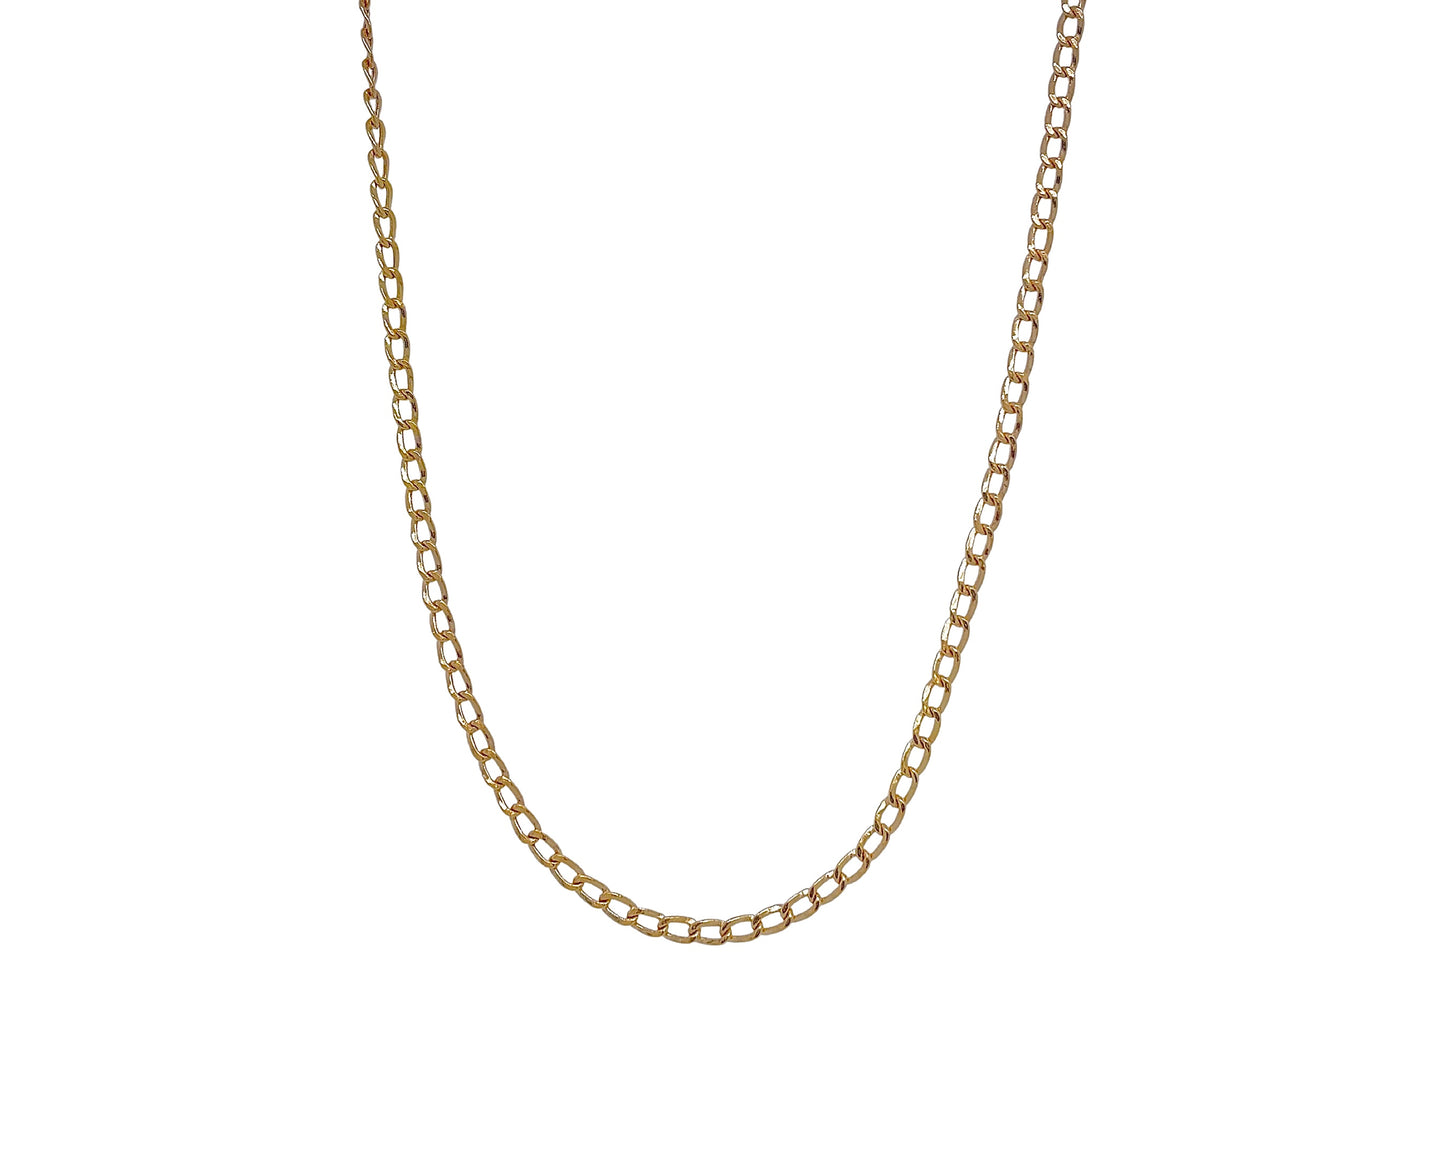 10k yellow gold necklace 